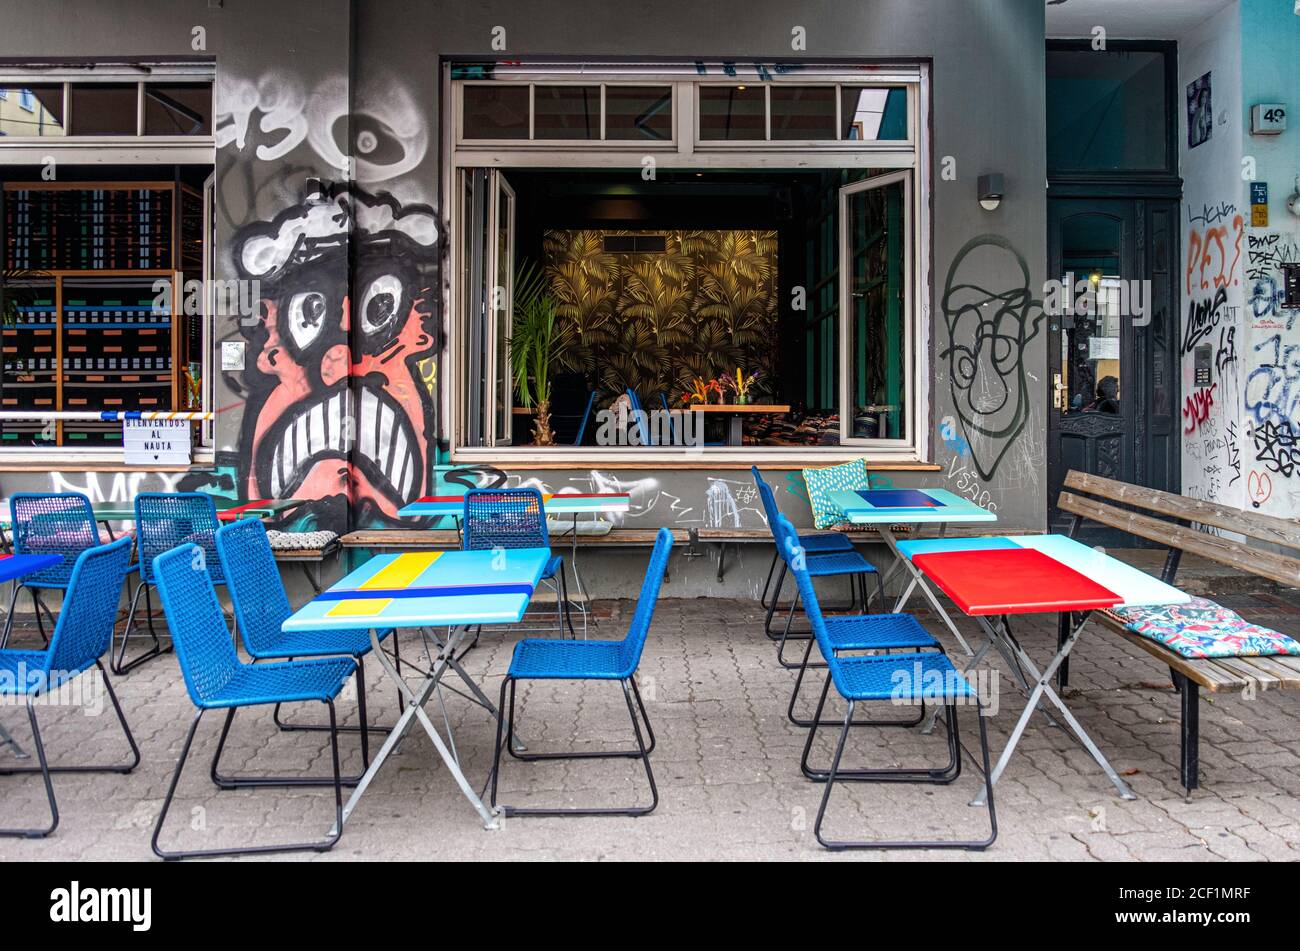 Nauta Peruvian Restaurant. Colourful graffiti-covered exterior with socially distanced oudoor tables during COVID-19 pandemic in Mitte Berlin Stock Photo